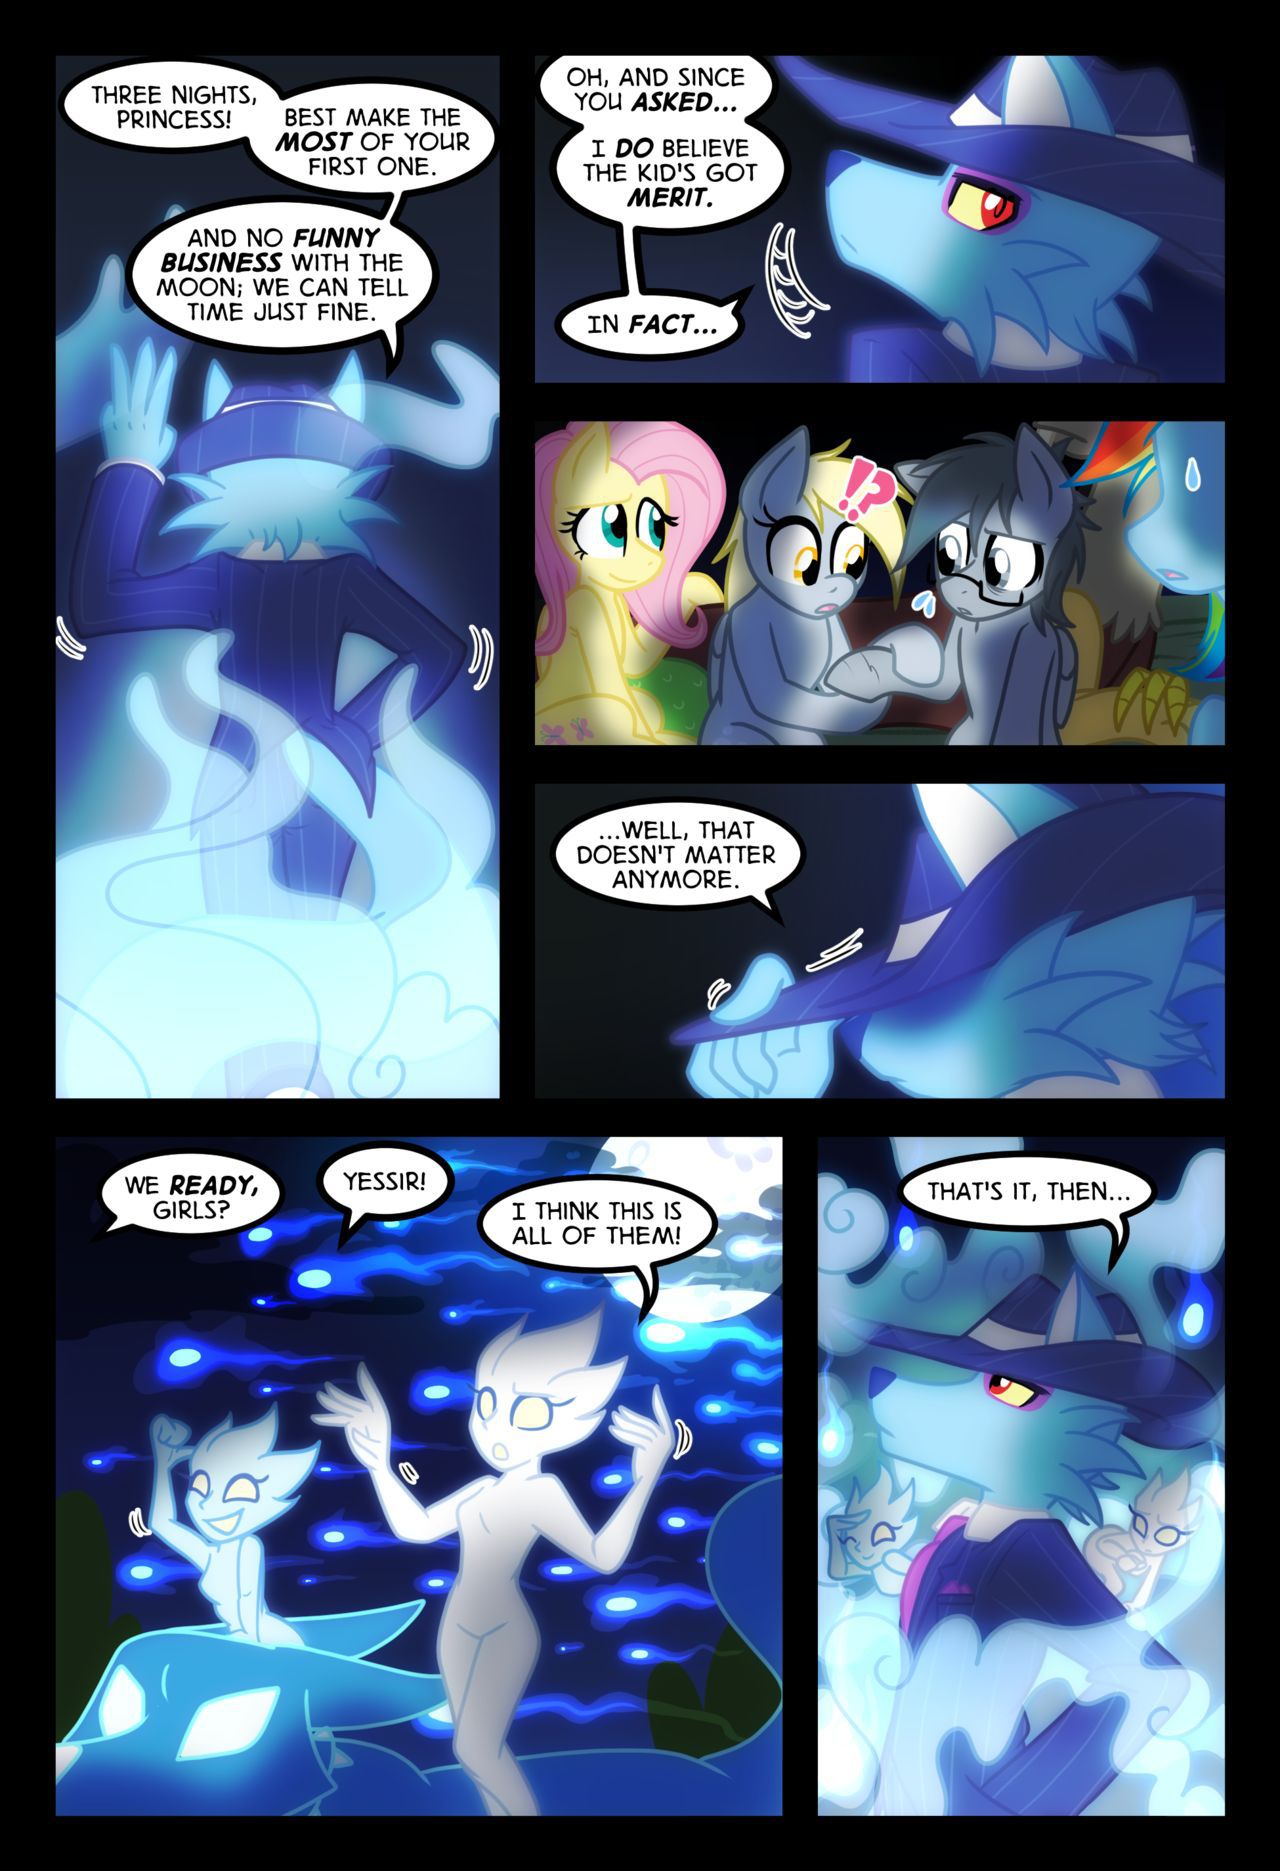 [Zaron] Lonely Hooves (My Little Pony Friendship Is Magic) [Ongoing] 186